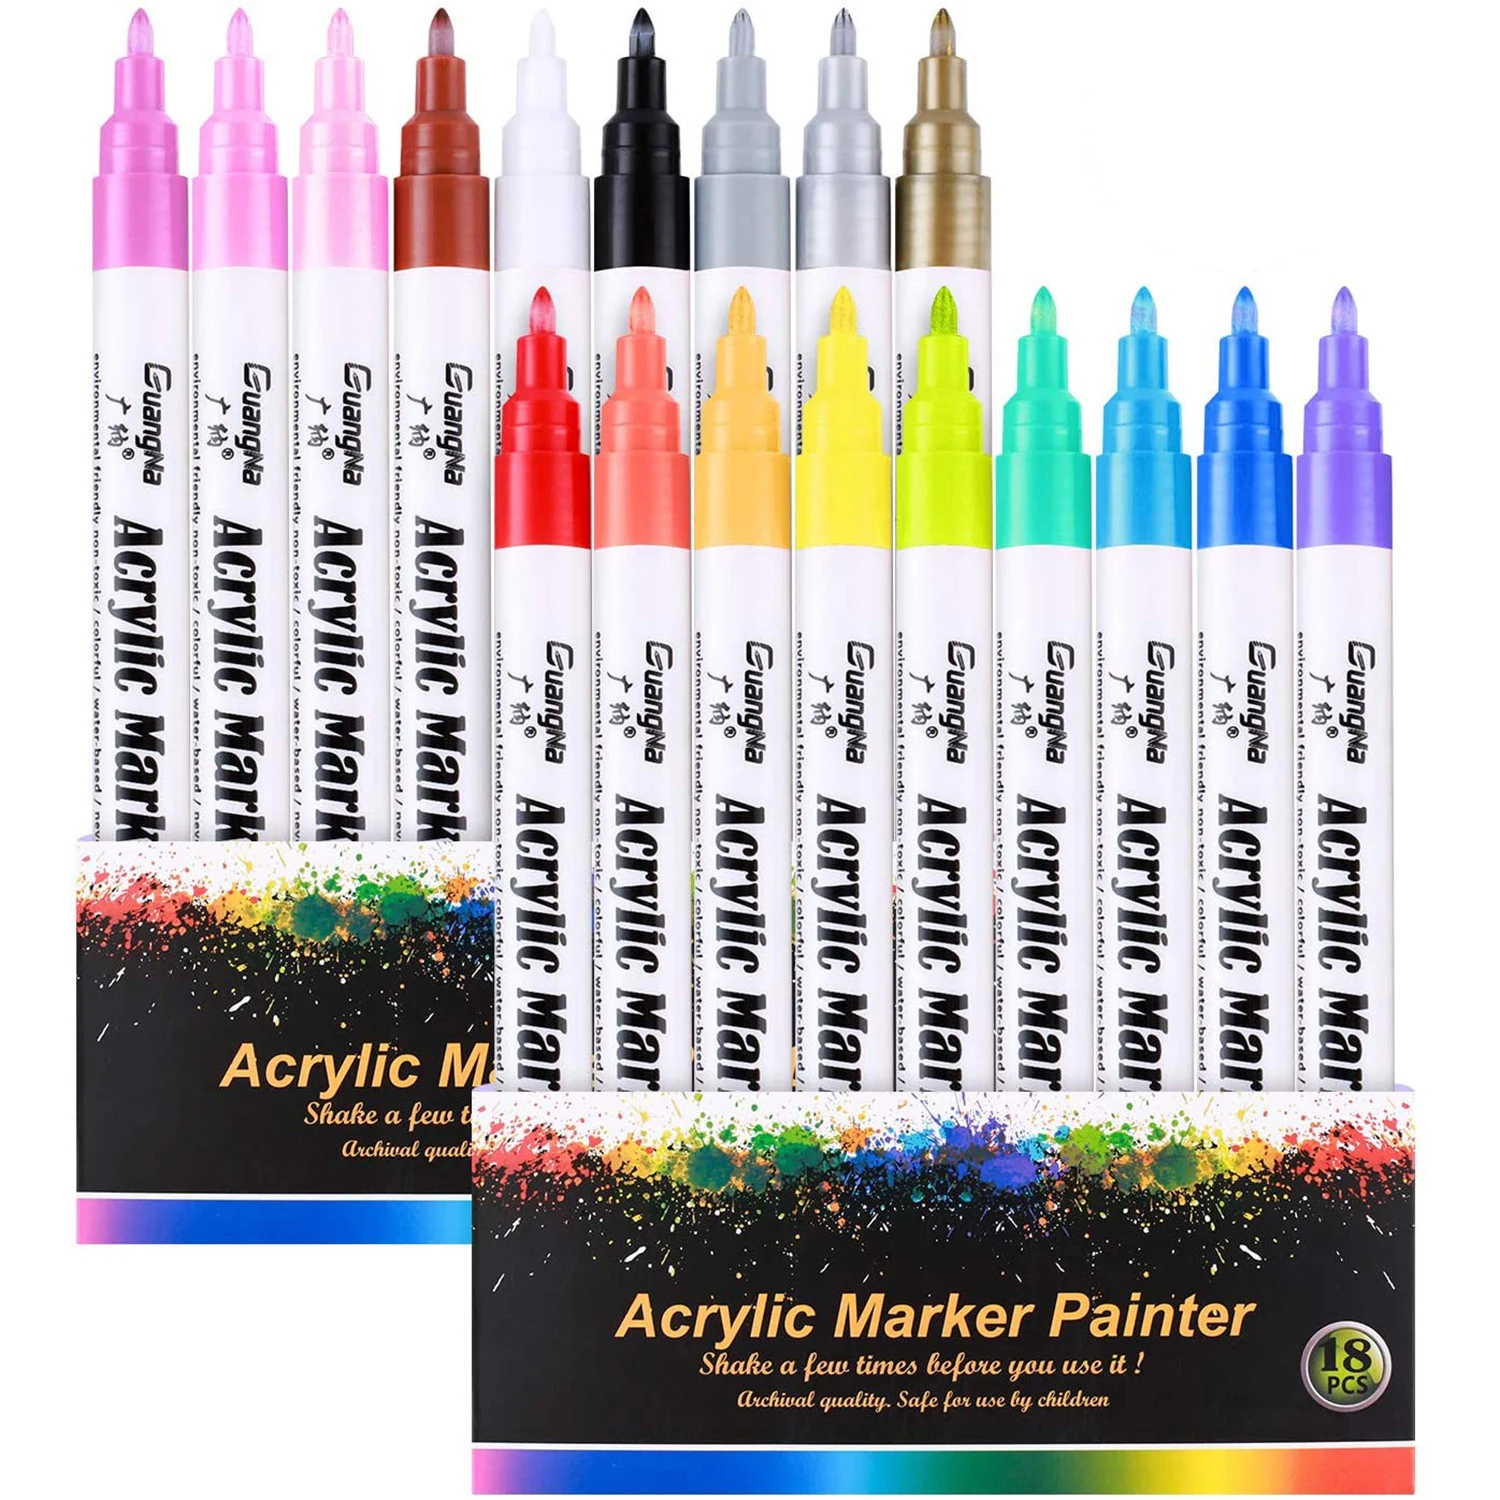 

Acrylic Marker, Acrylic Paint Pens for Rock Painting,18 Colors Paint Markers Kit,0.7mm Extra Fine Tip,Water Based, Quick-Dry